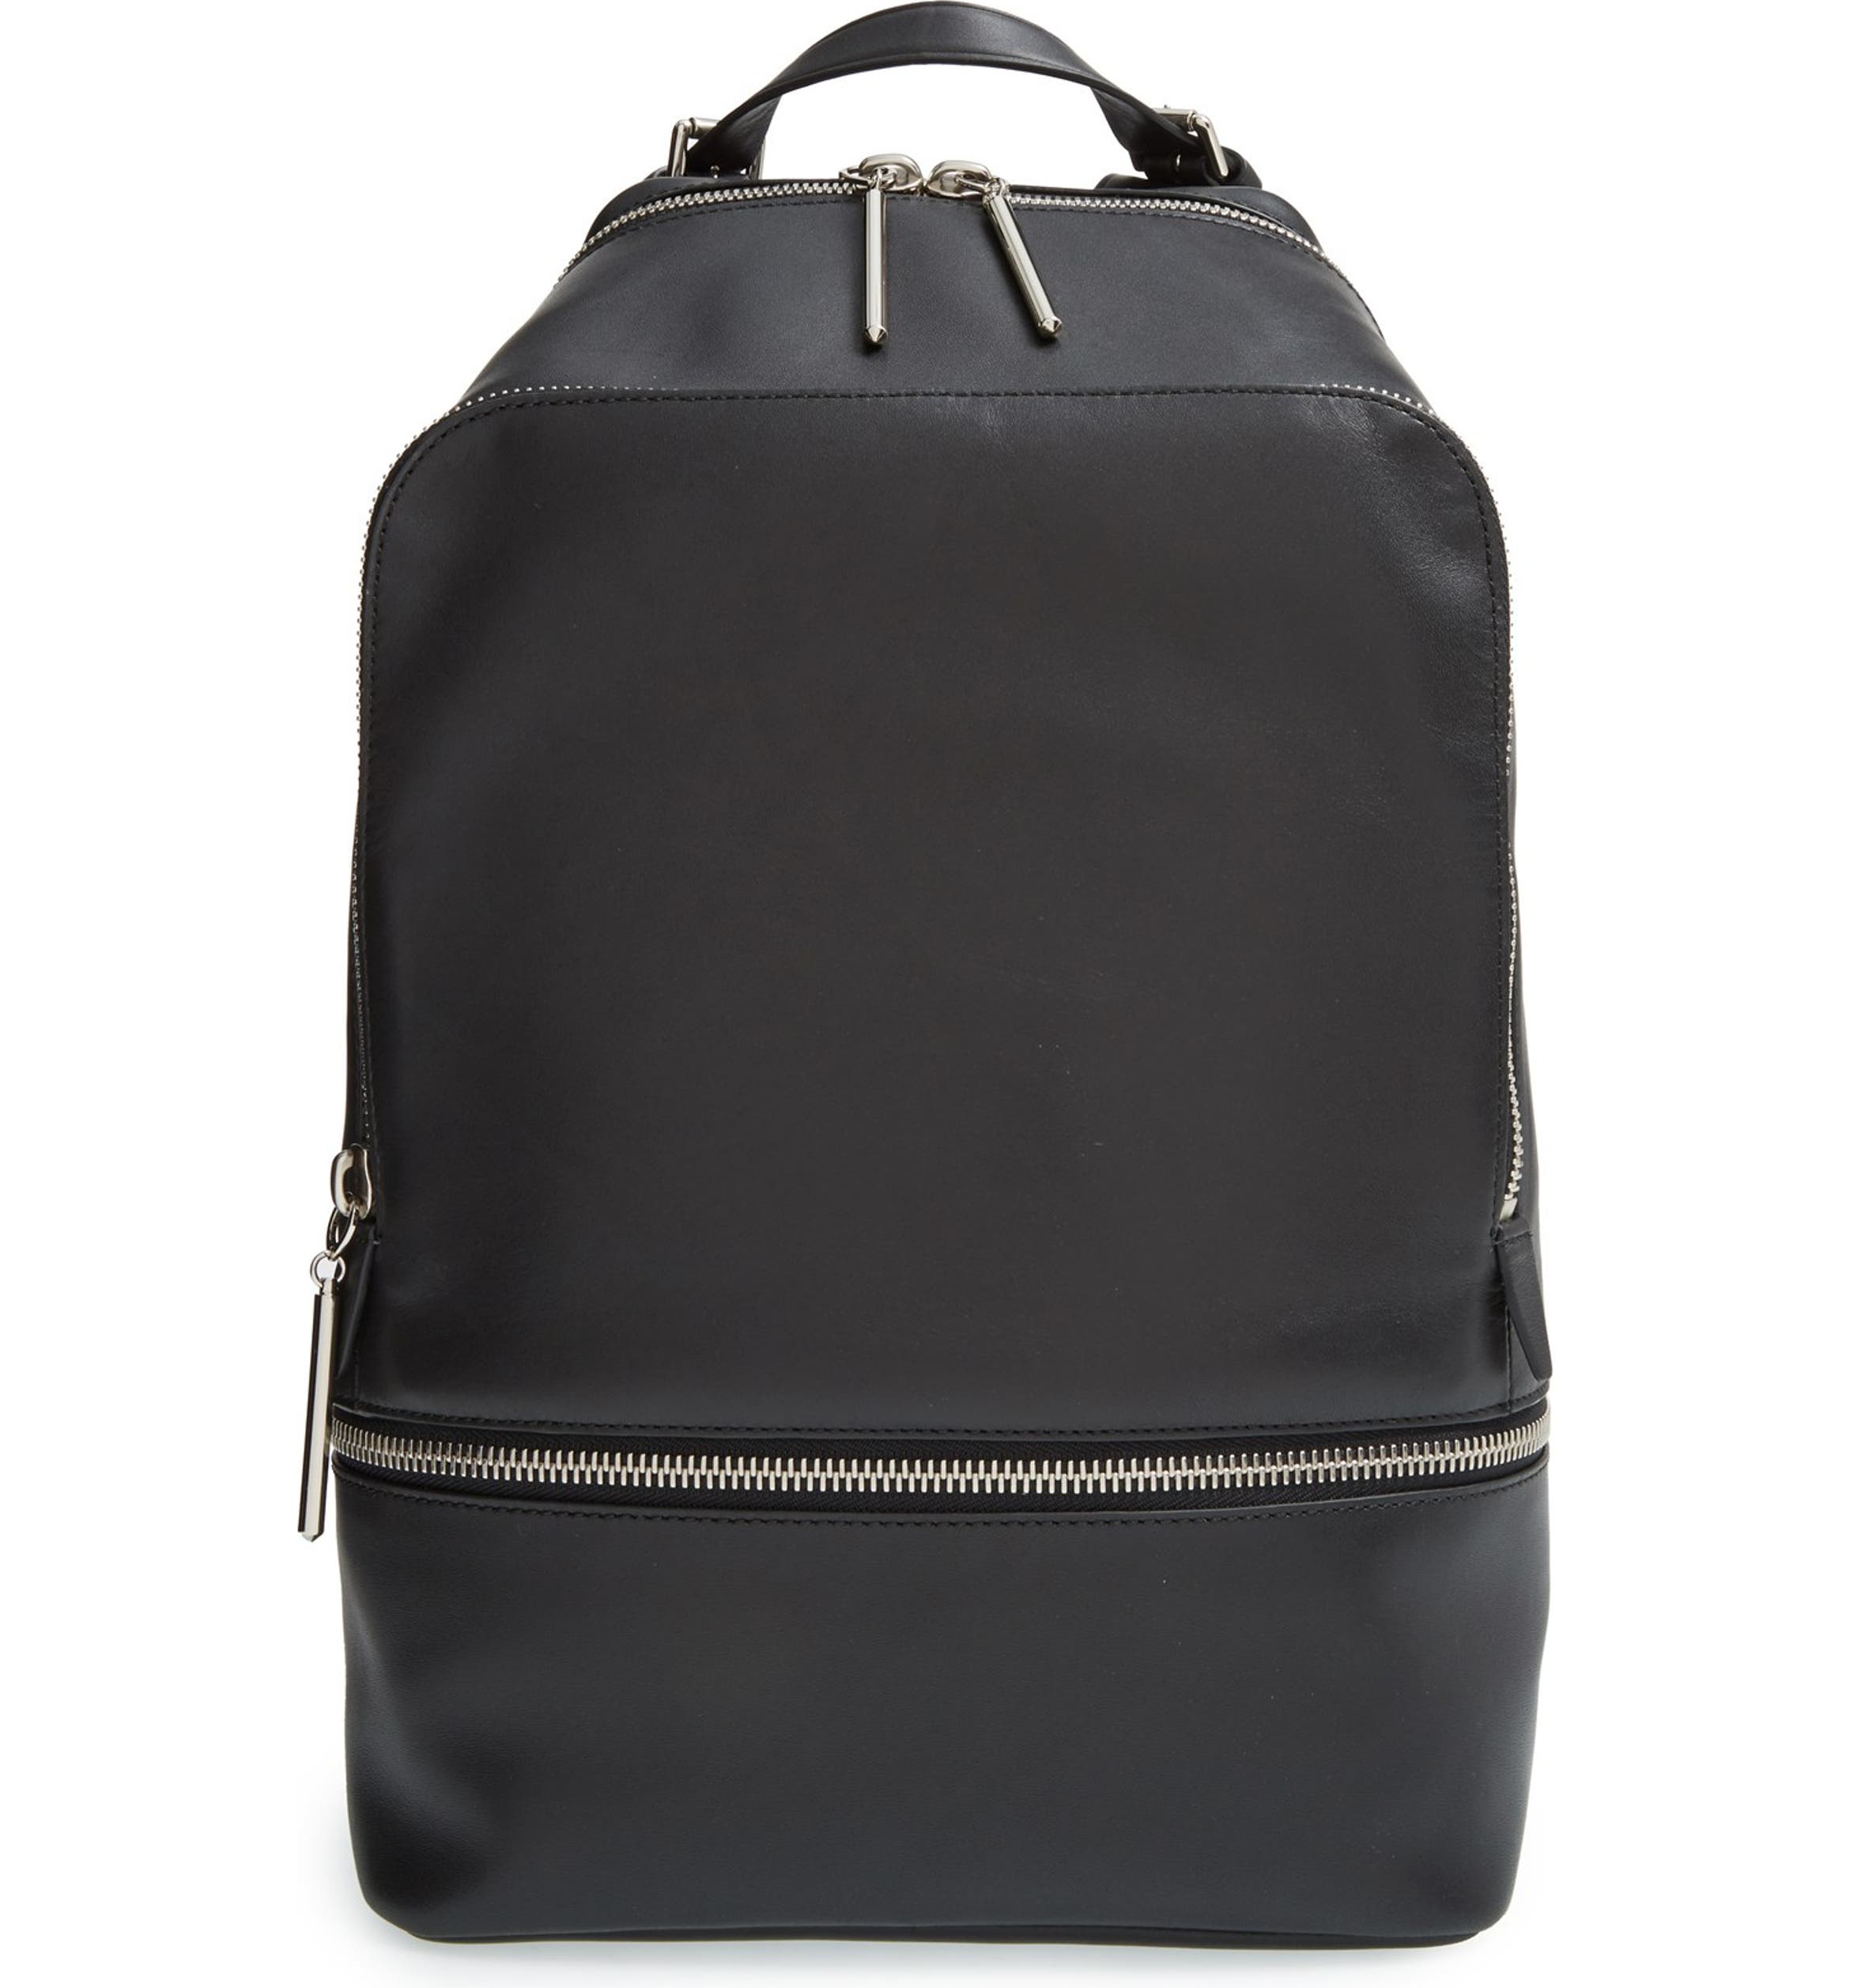 3.1 Phillip Lim '31 Hour' Zip Around Leather Backpack | Nordstrom